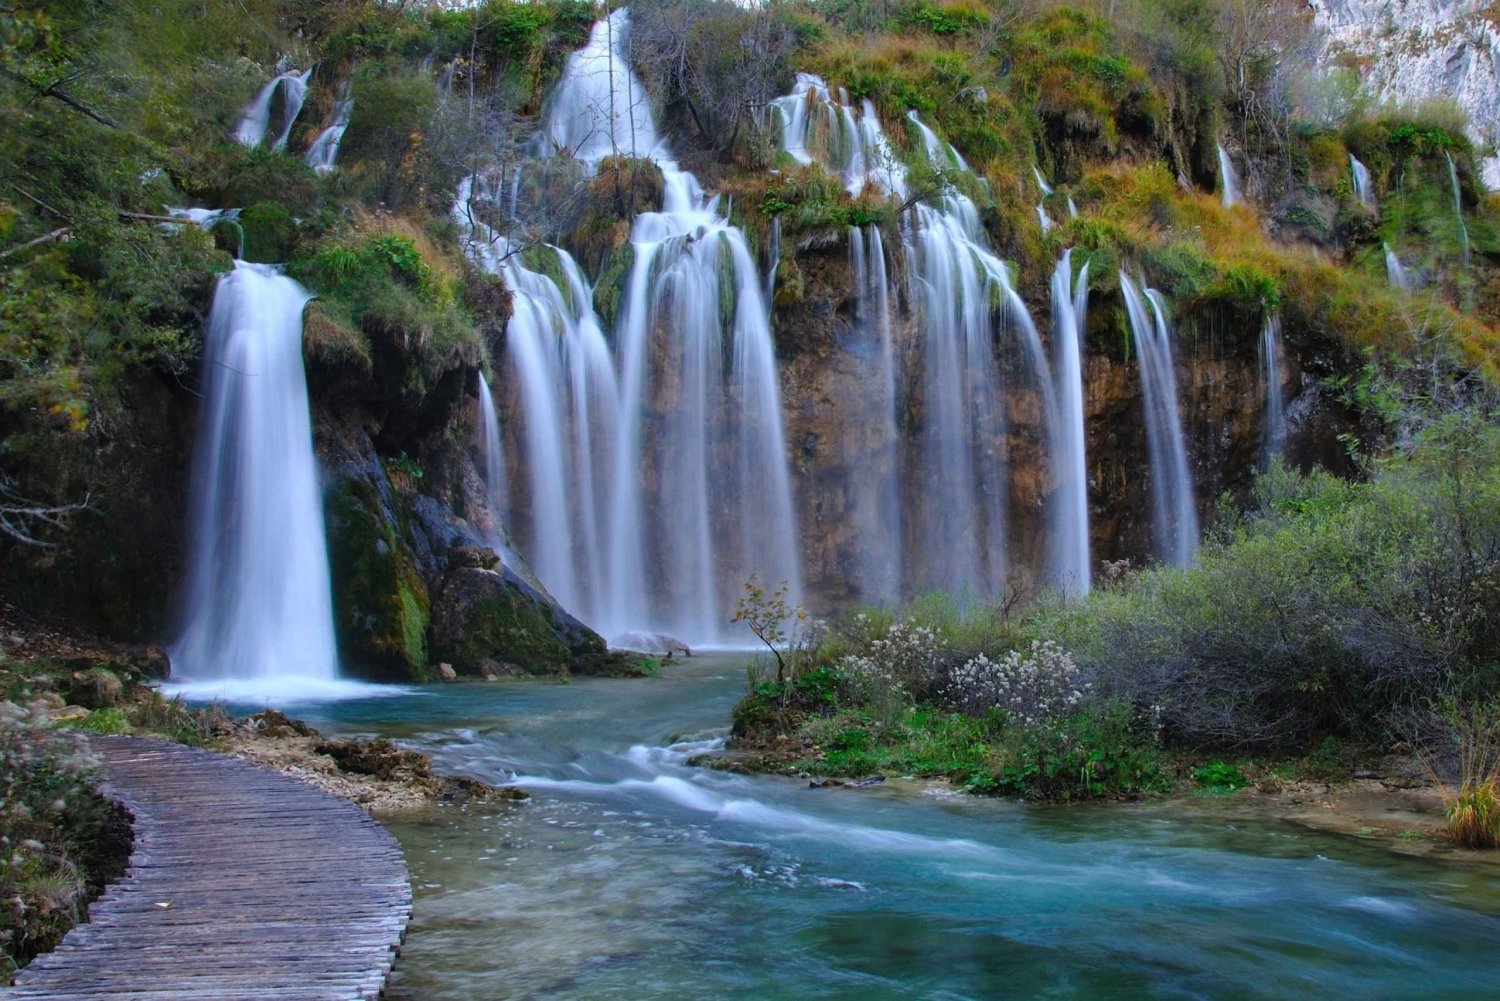 Plitvice Lakes National Park: Private Tour from Zadar